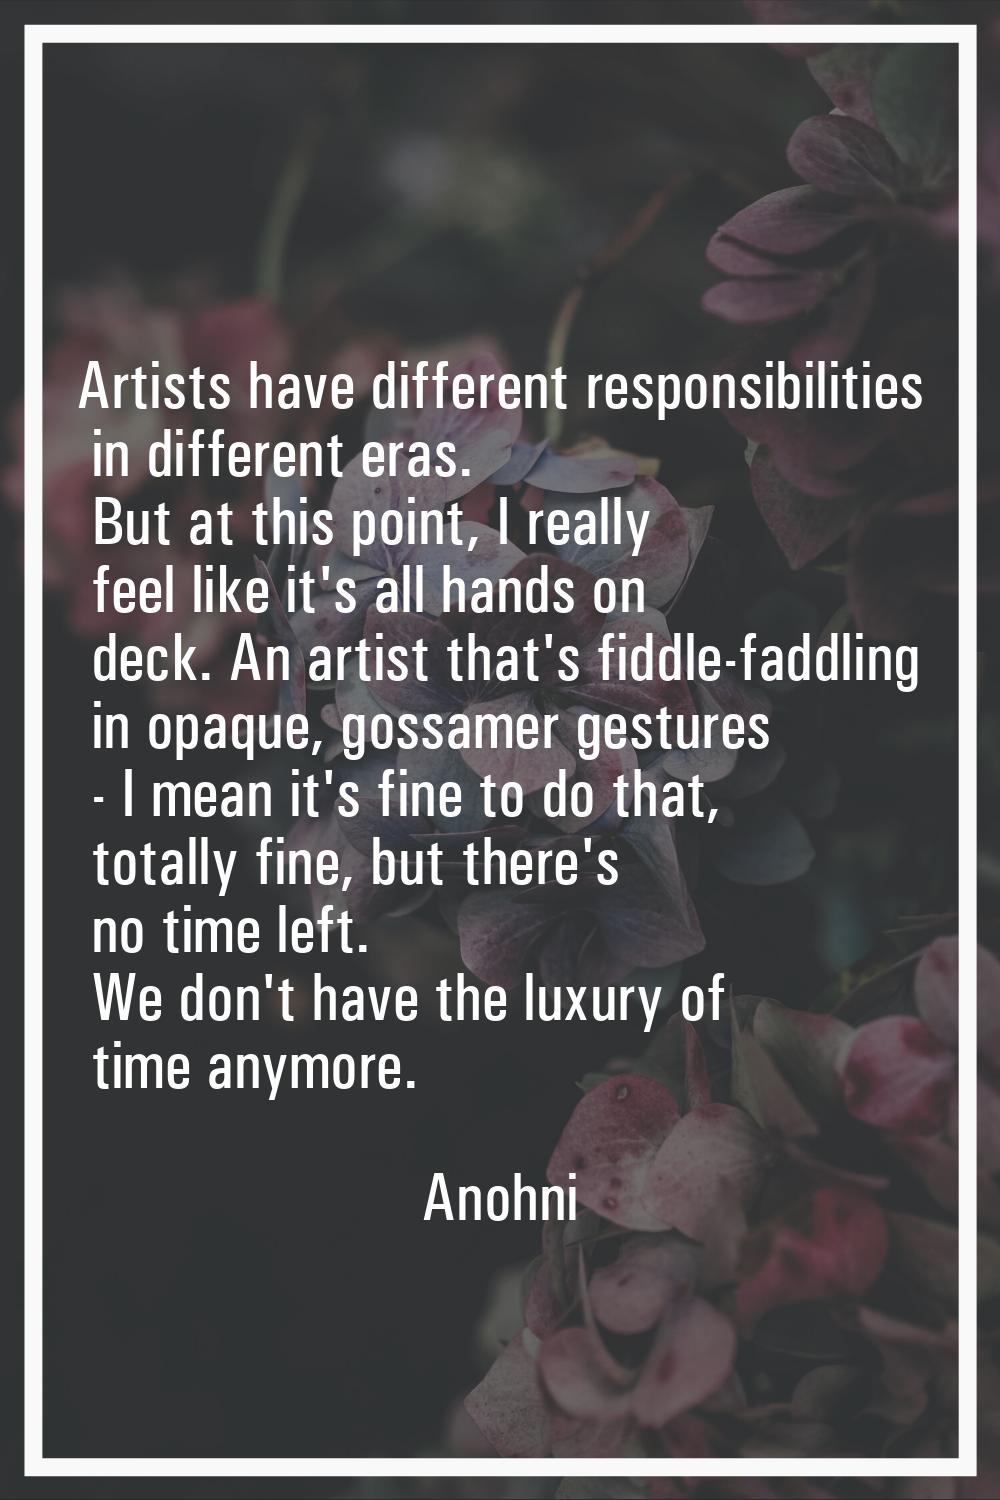 Artists have different responsibilities in different eras. But at this point, I really feel like it